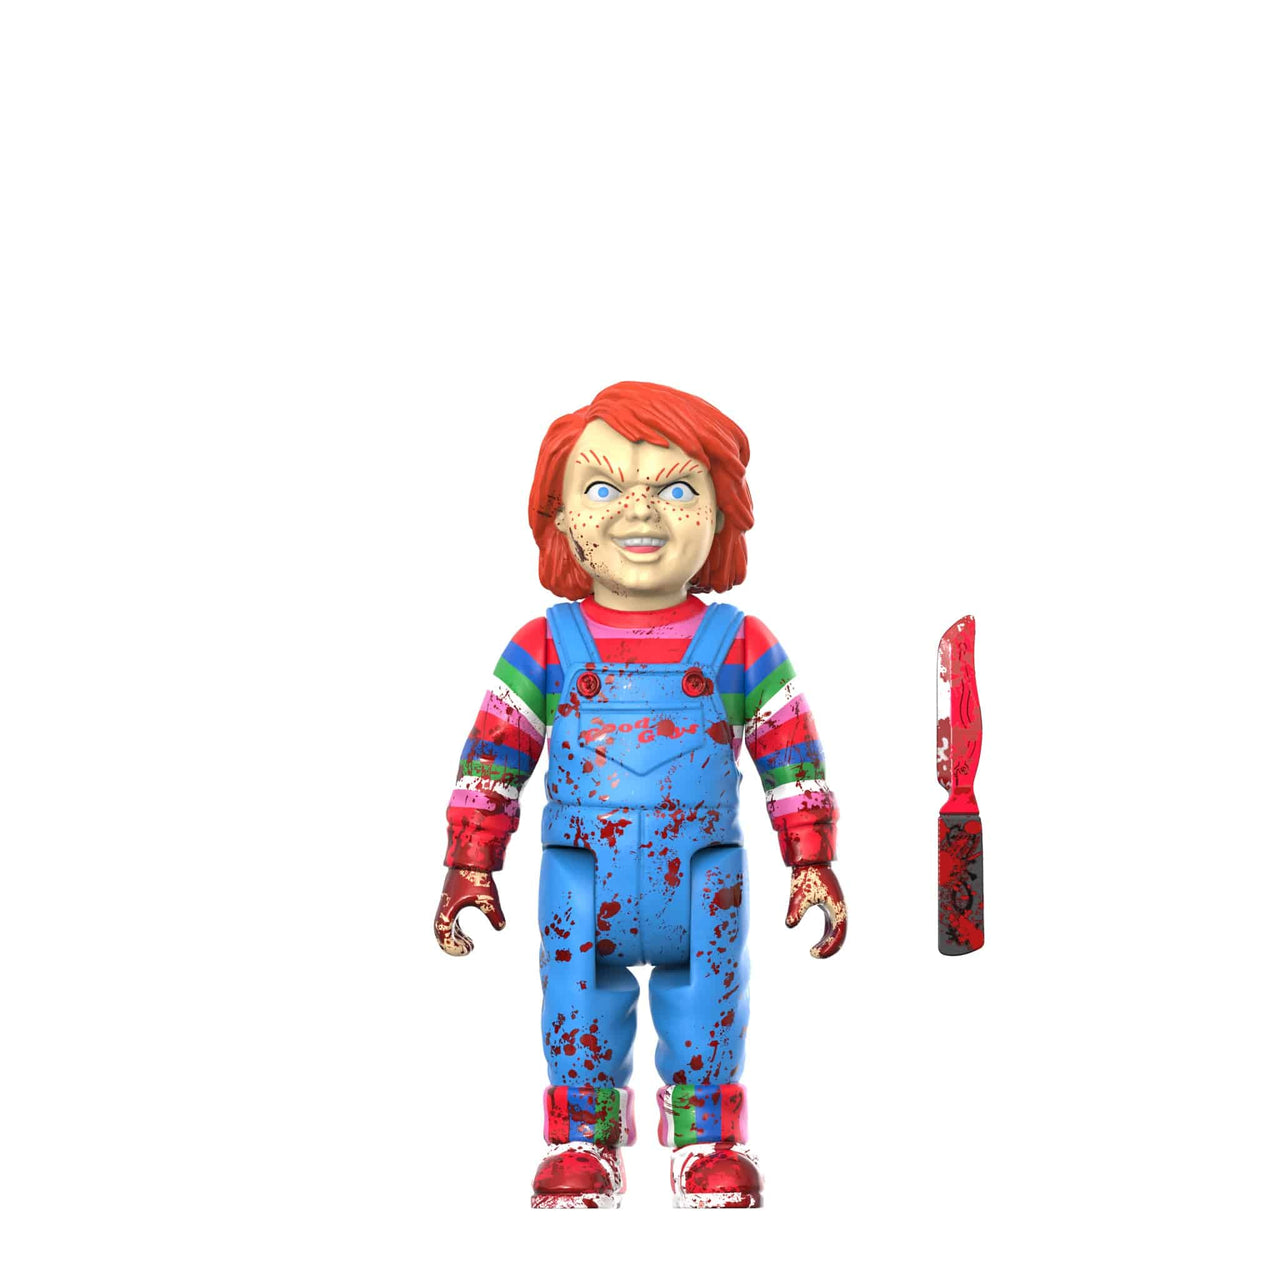 Childs Play Homicidal Chucky Figure by Super7